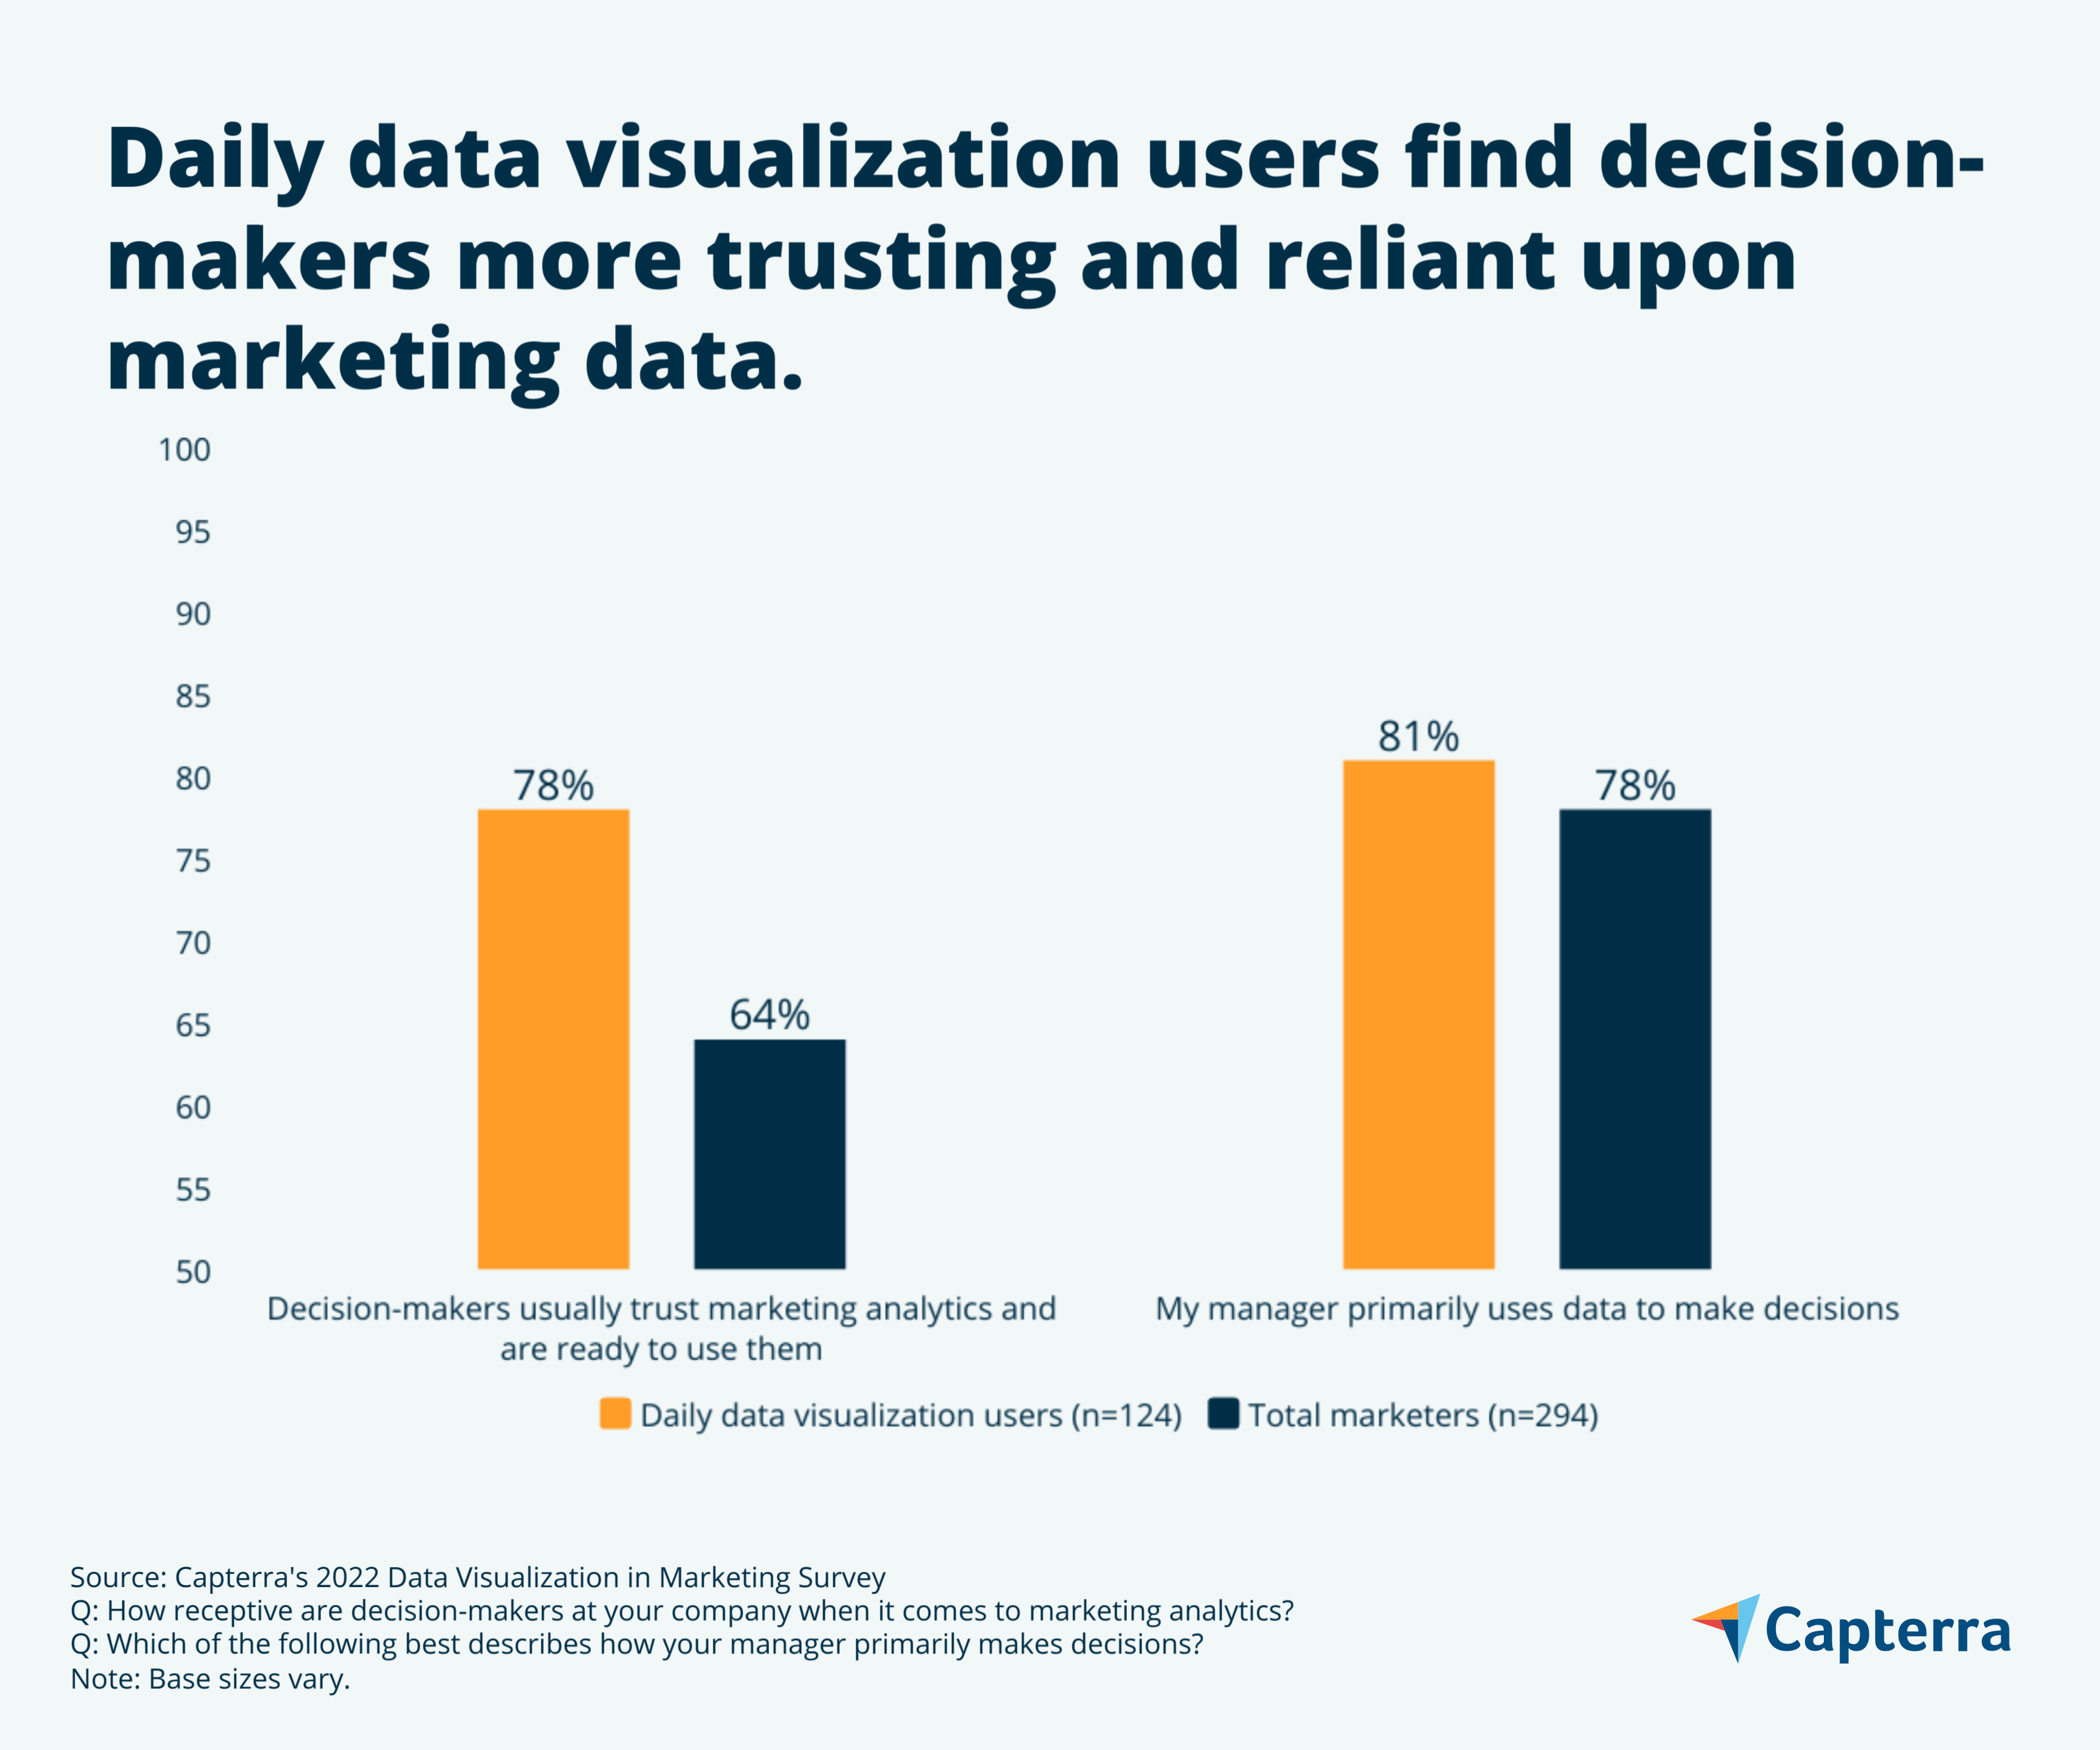 Infographic showing "Daily data visualization users find decision-makers more trusting and reliant upon marketing data" for the blog article "How Data Visualization Influences Marketing Decision-Makers"